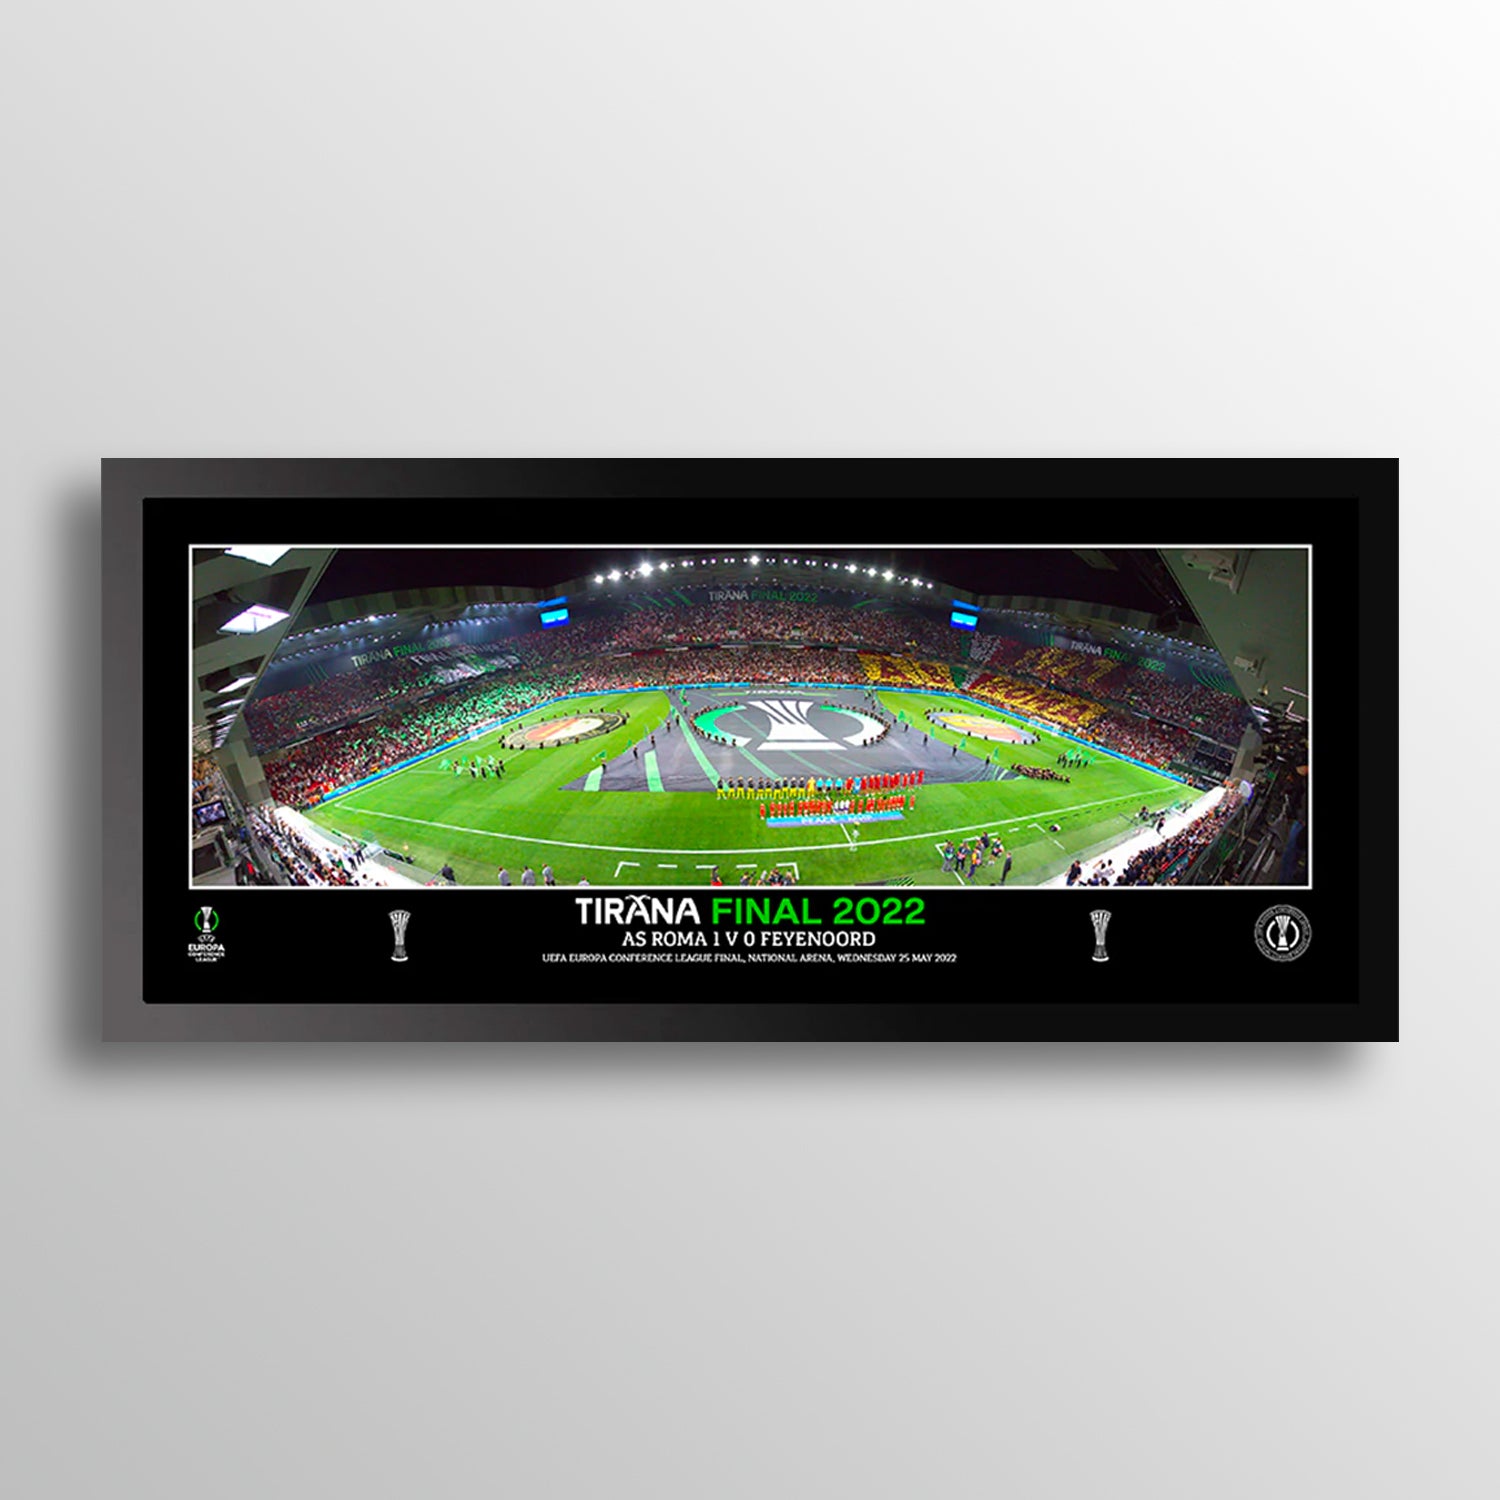 Tirana Tempered Glass Panoramic Line Up 12"x5" Framed Print - Conference League Final UEFA Club Competitions Online Store